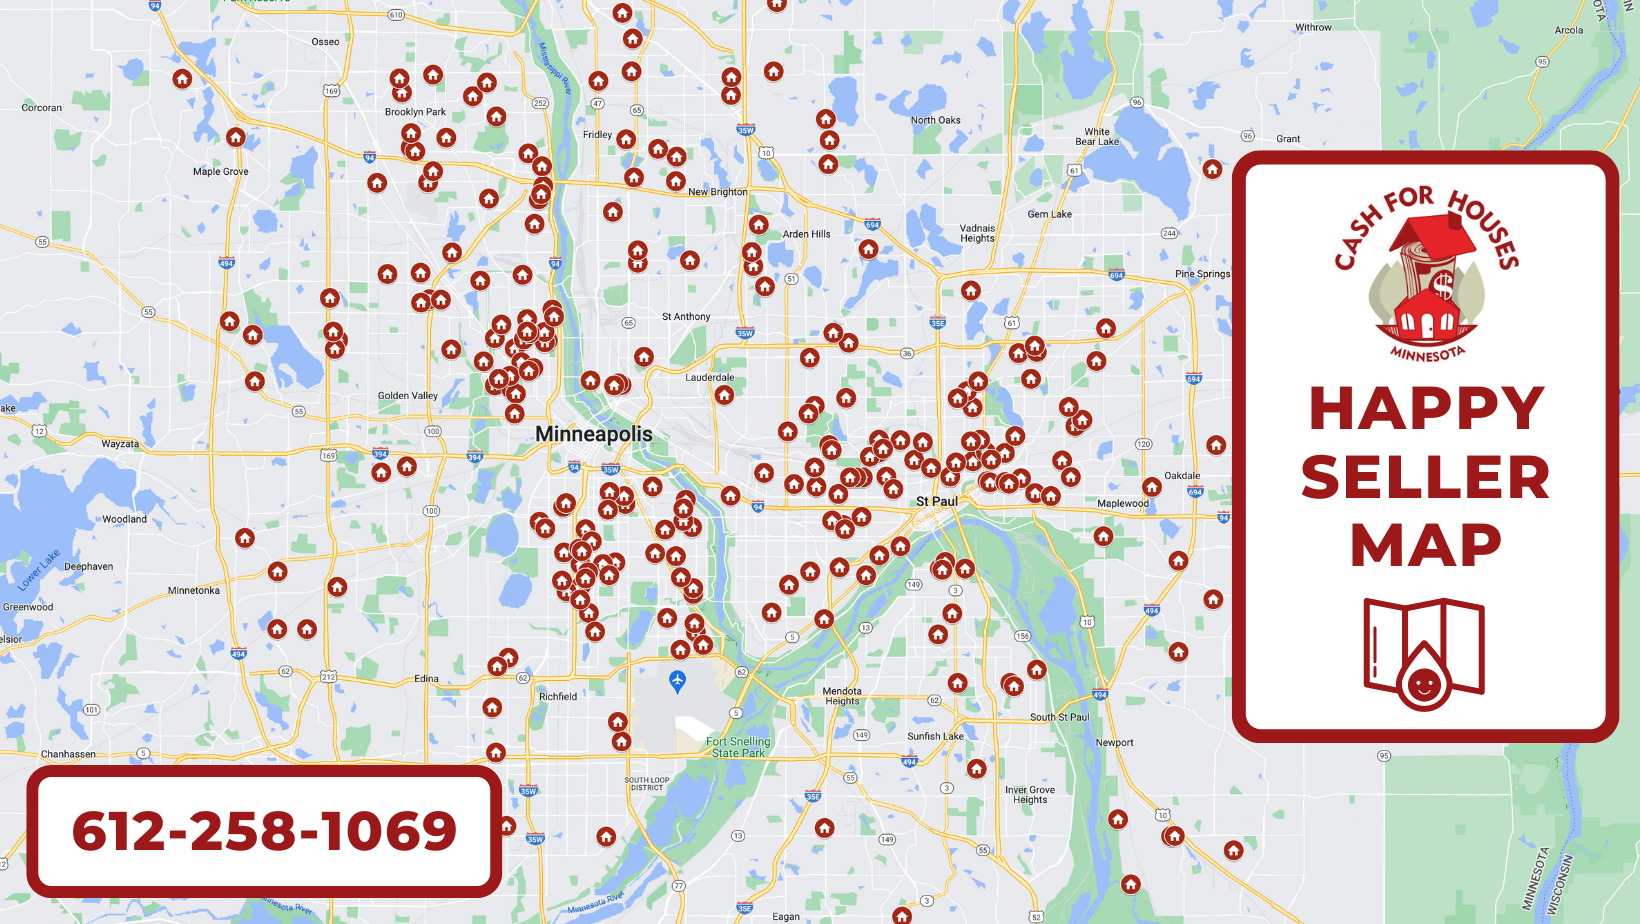 Cash For Houses Happy Seller Map shows hundreds of red dots in the Minneapolis area.